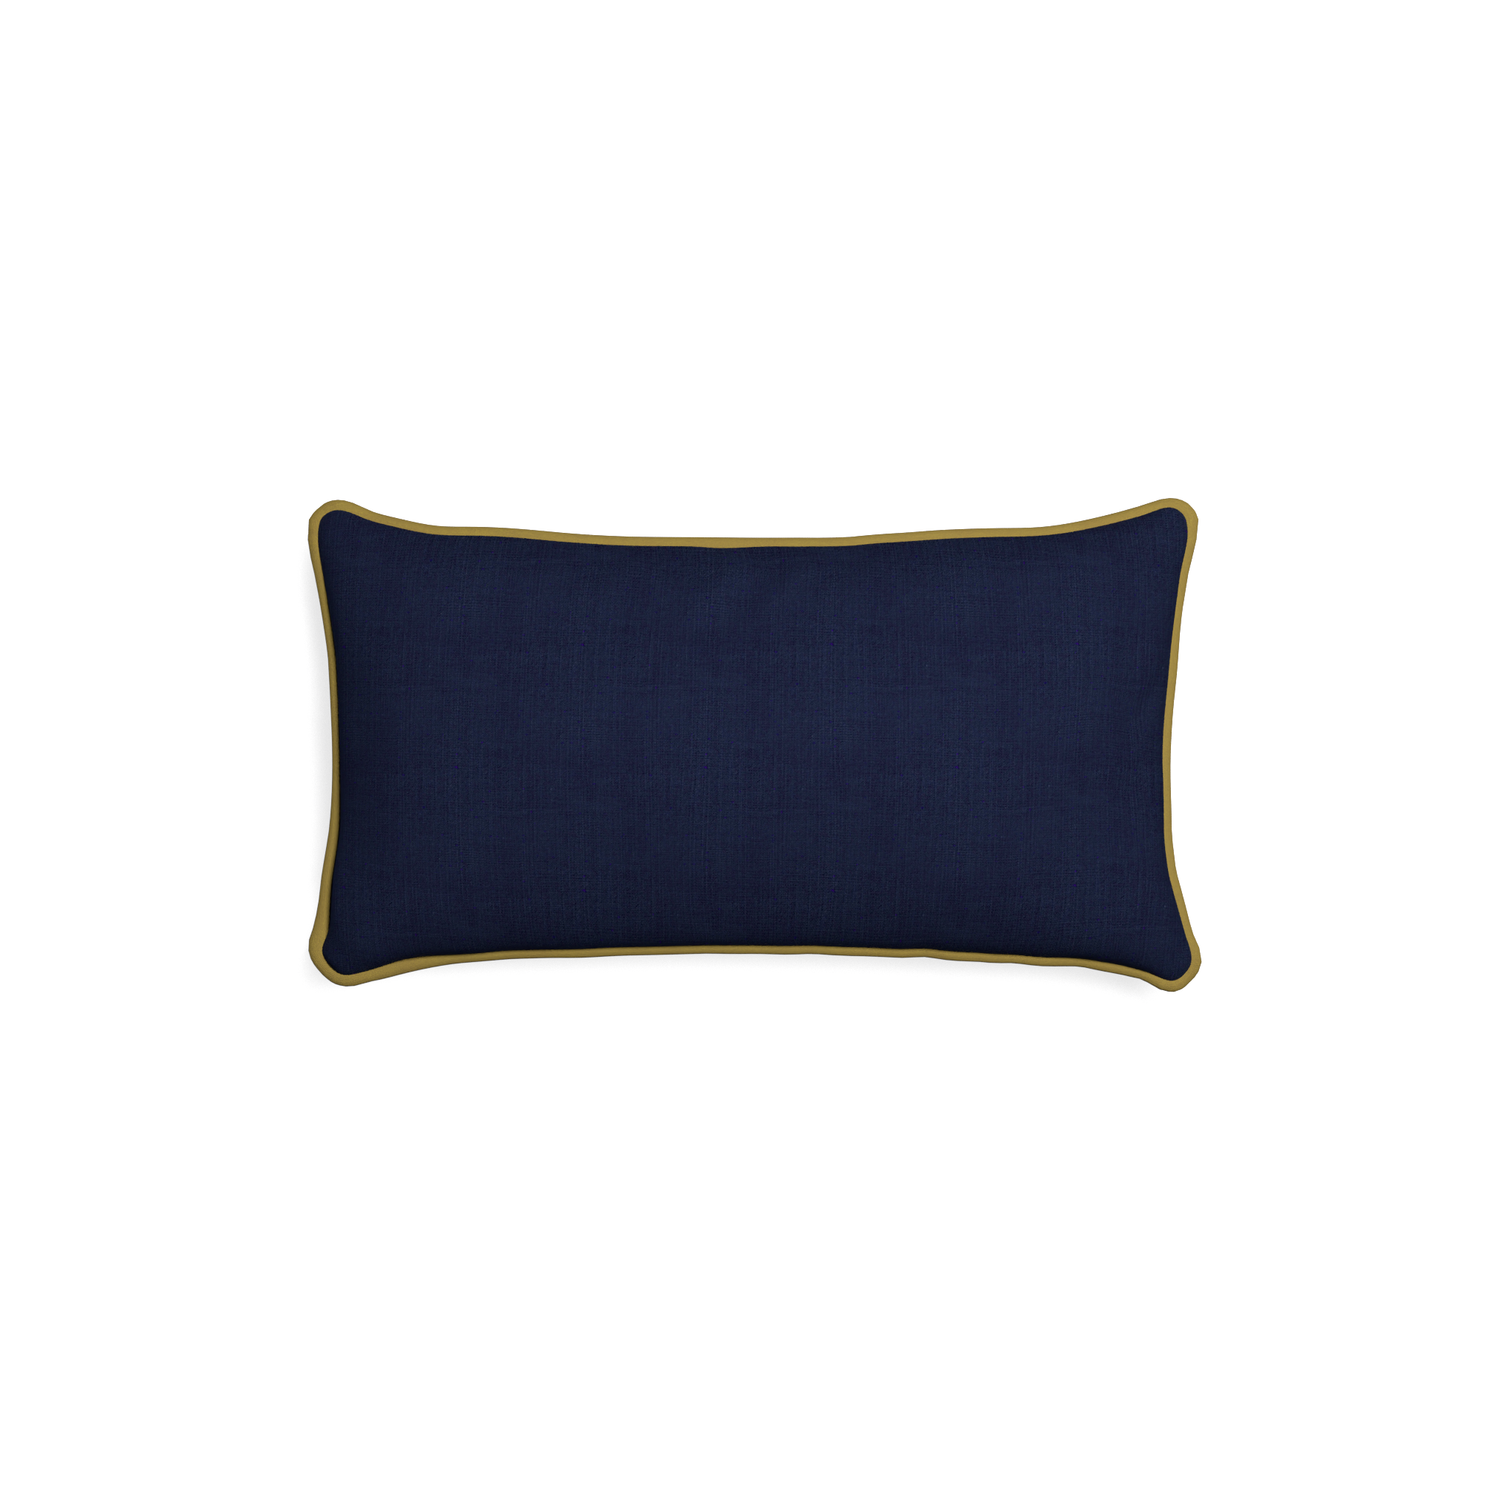 Petite-lumbar midnight custom navy bluepillow with c piping on white background